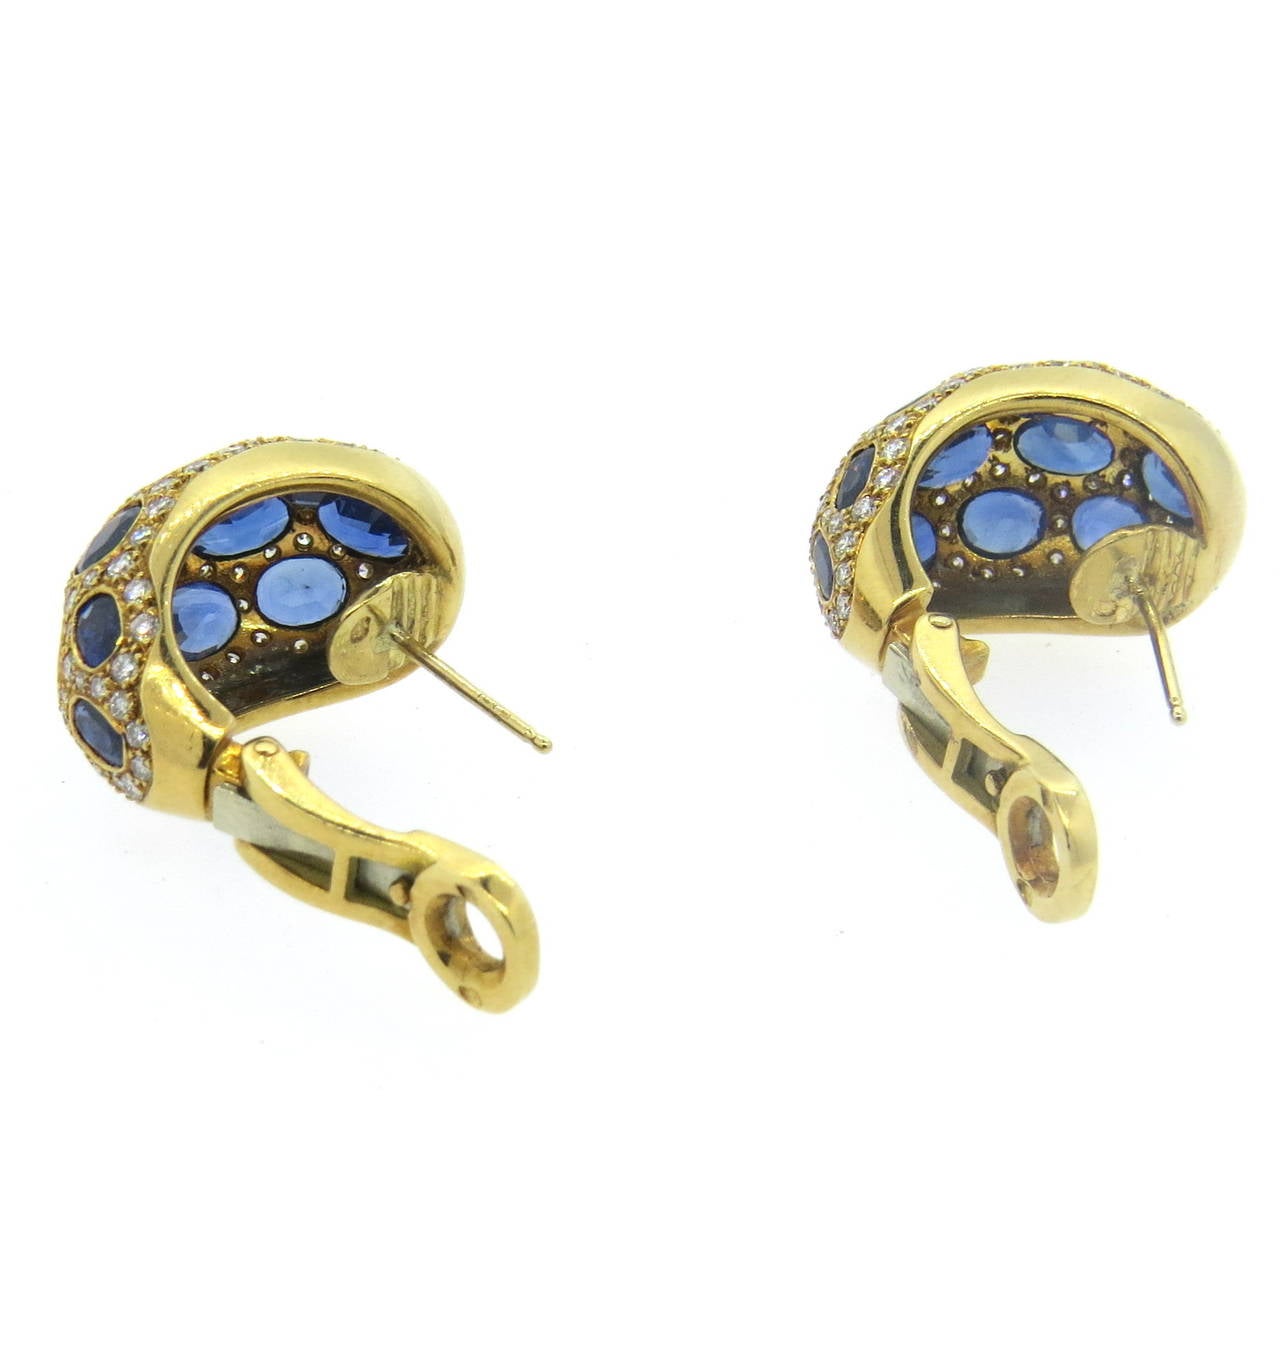 A pair of 18k yellow gold earrings, set with approximately 9 carats in sapphires and 1.85cts in G/VS diamonds.  Crafted in France, the earrings measure 30mm x 14.5mm and weigh 21.7 grams.